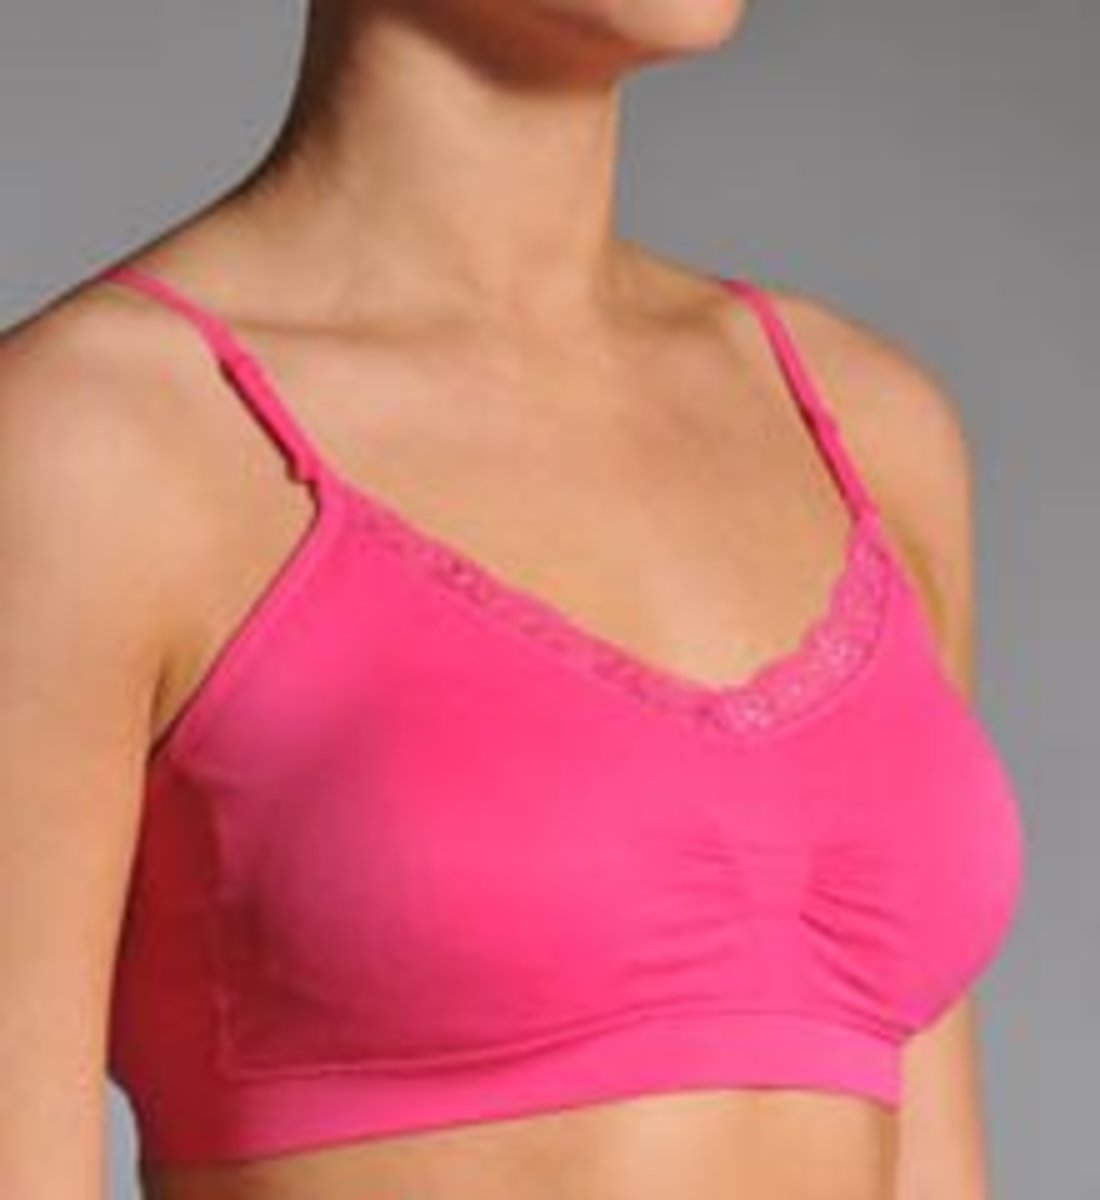 a-guide-to-the-coobie-bra-does-one-size-really-fit-all